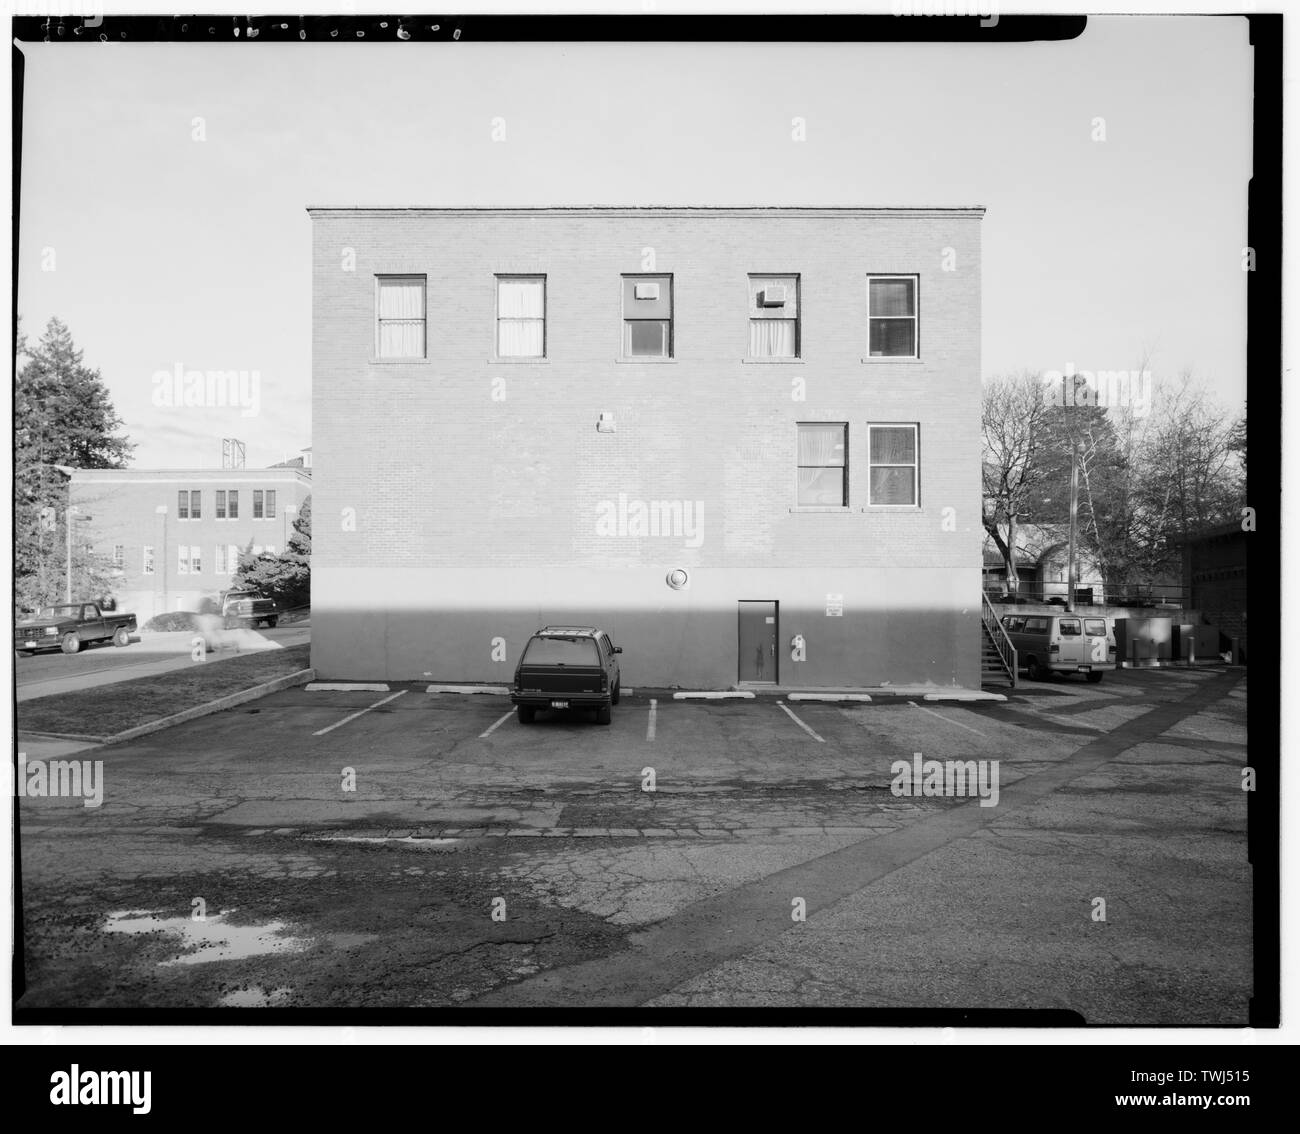 Second view of west side (west elevation) - University of Idaho, Dairy Science Building, West side of Line Street, between Univesity Avenue and Idaho Avenue, Moscow, Latah County, ID Stock Photo